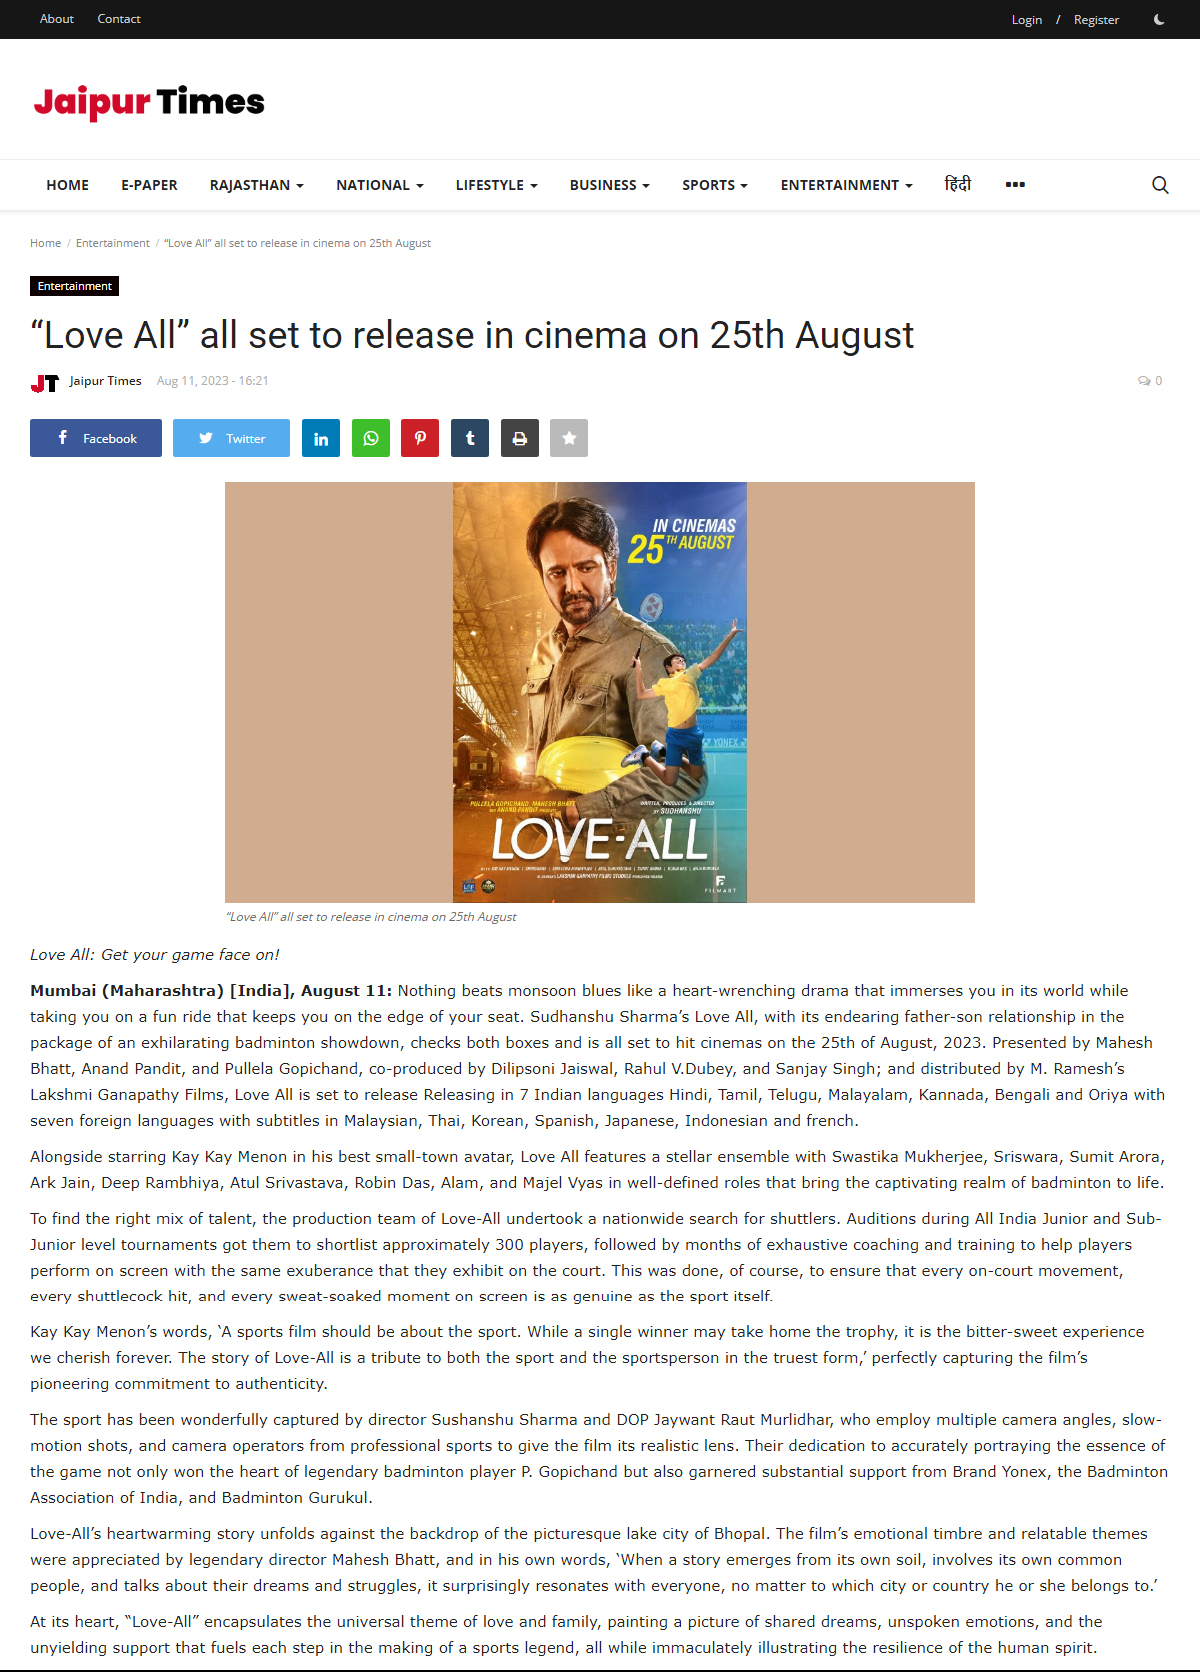 “Love All” all set to release in cinema on 1st September